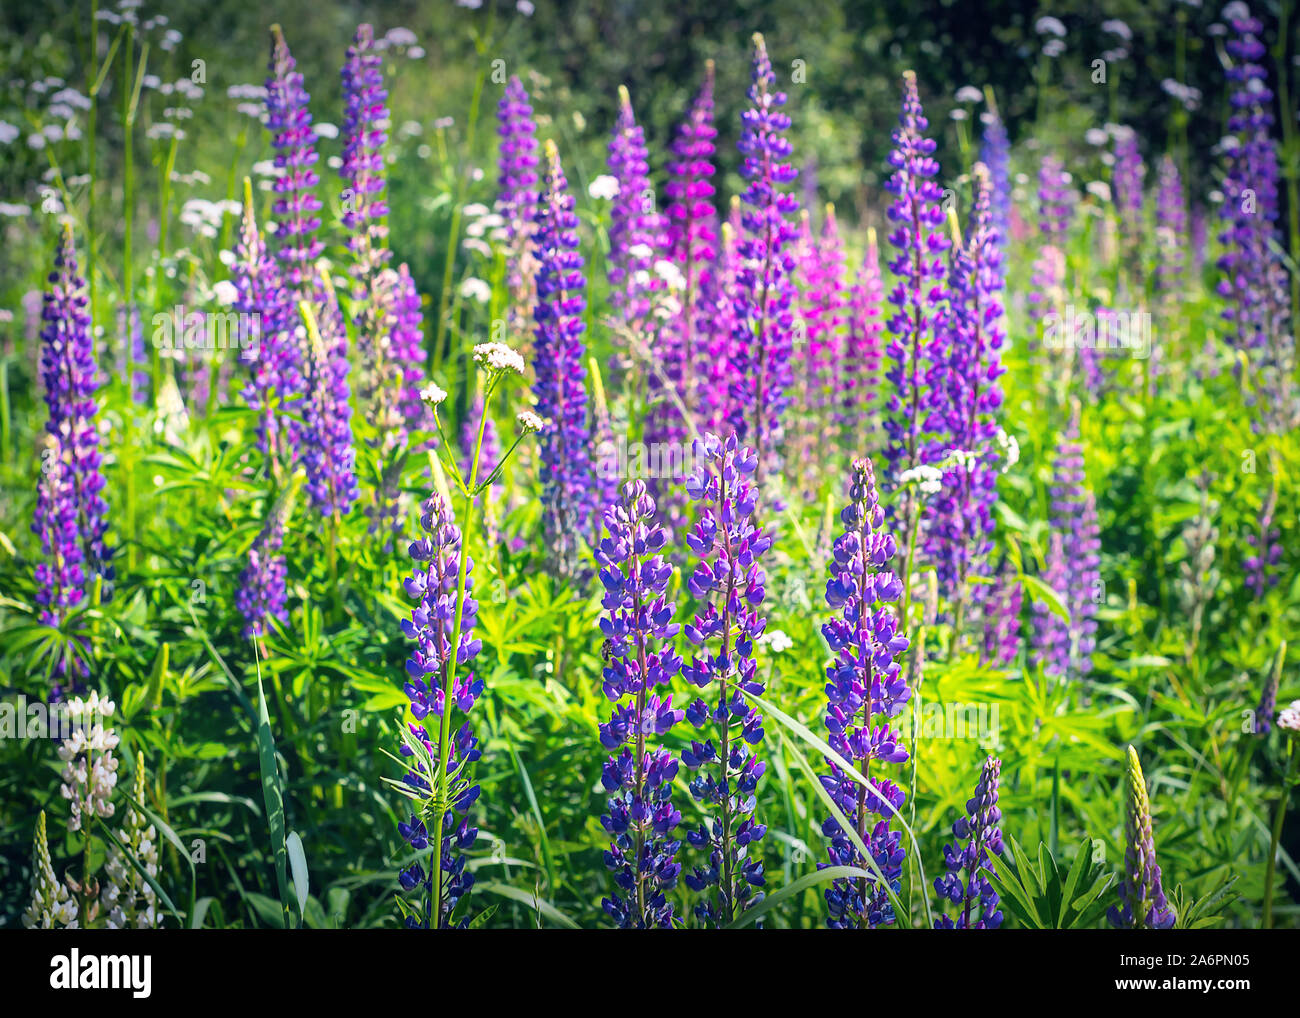 Upright Racemes of Blooming Purple and Pink Flowers of Fireweed or Willowherb, Chamaenerion Angustifolium, on a Sunny Summer Day. Stock Photo